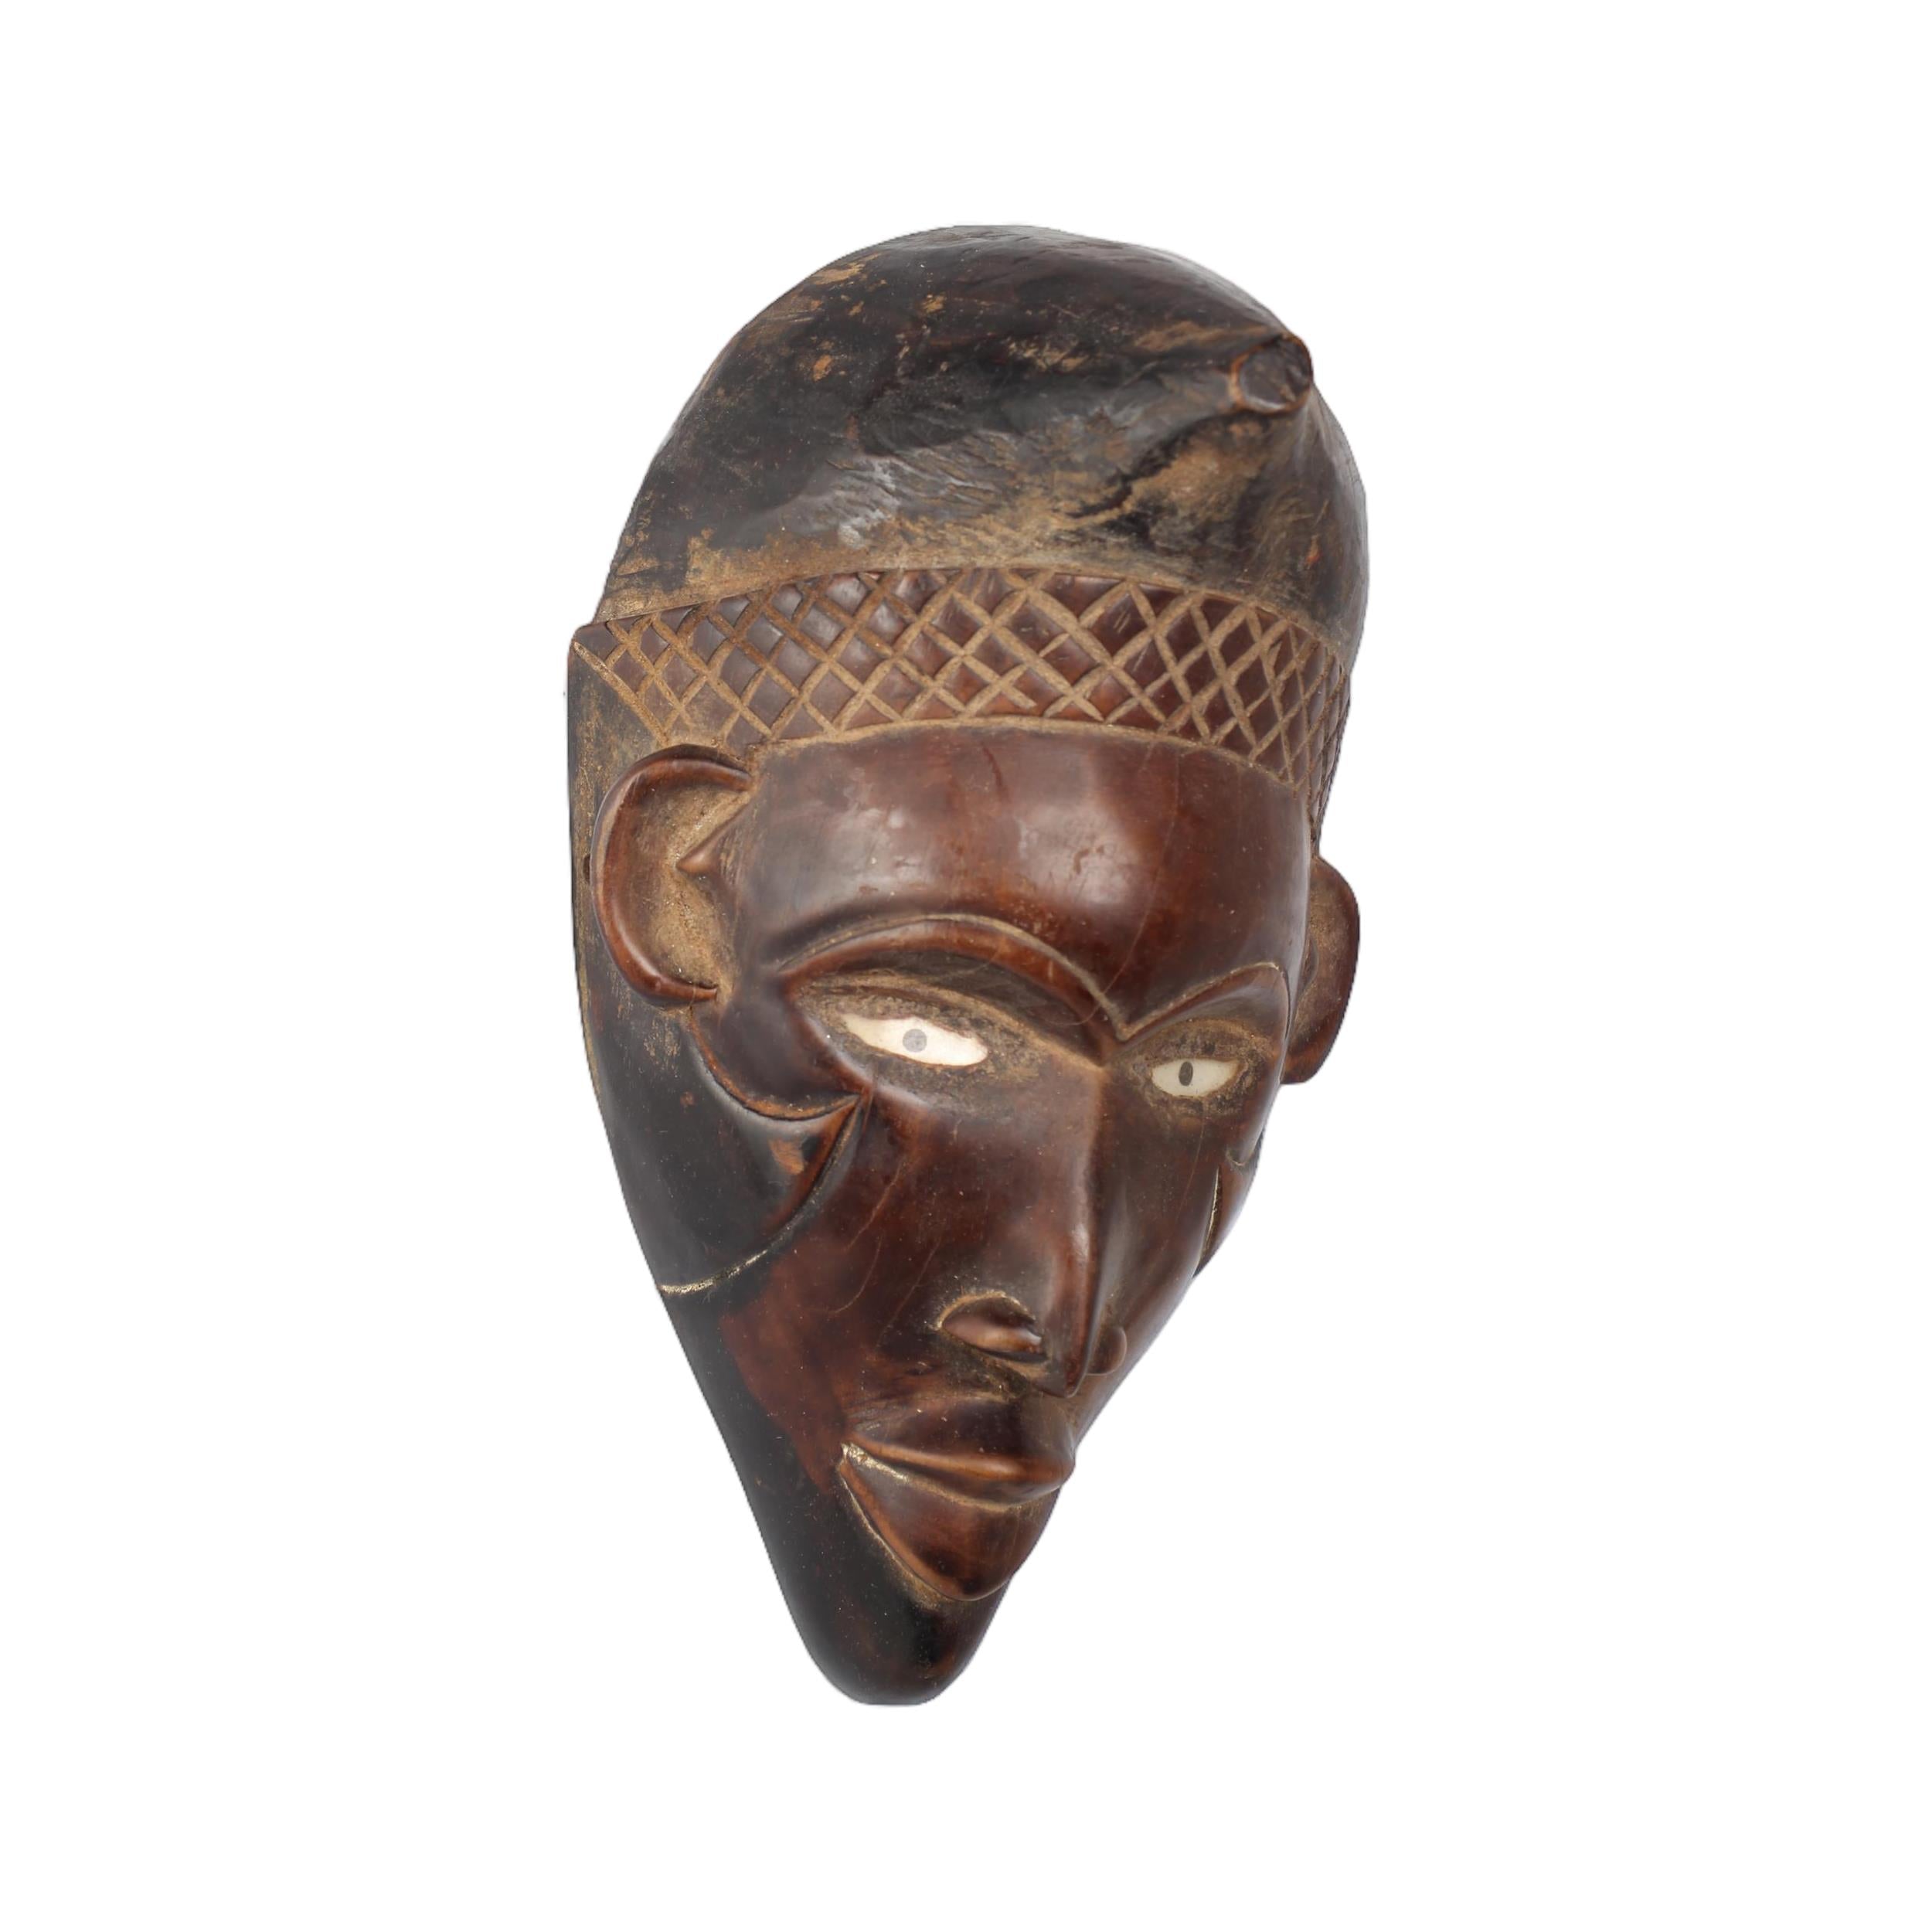 Pende Tribe Mask ~9.4" Tall